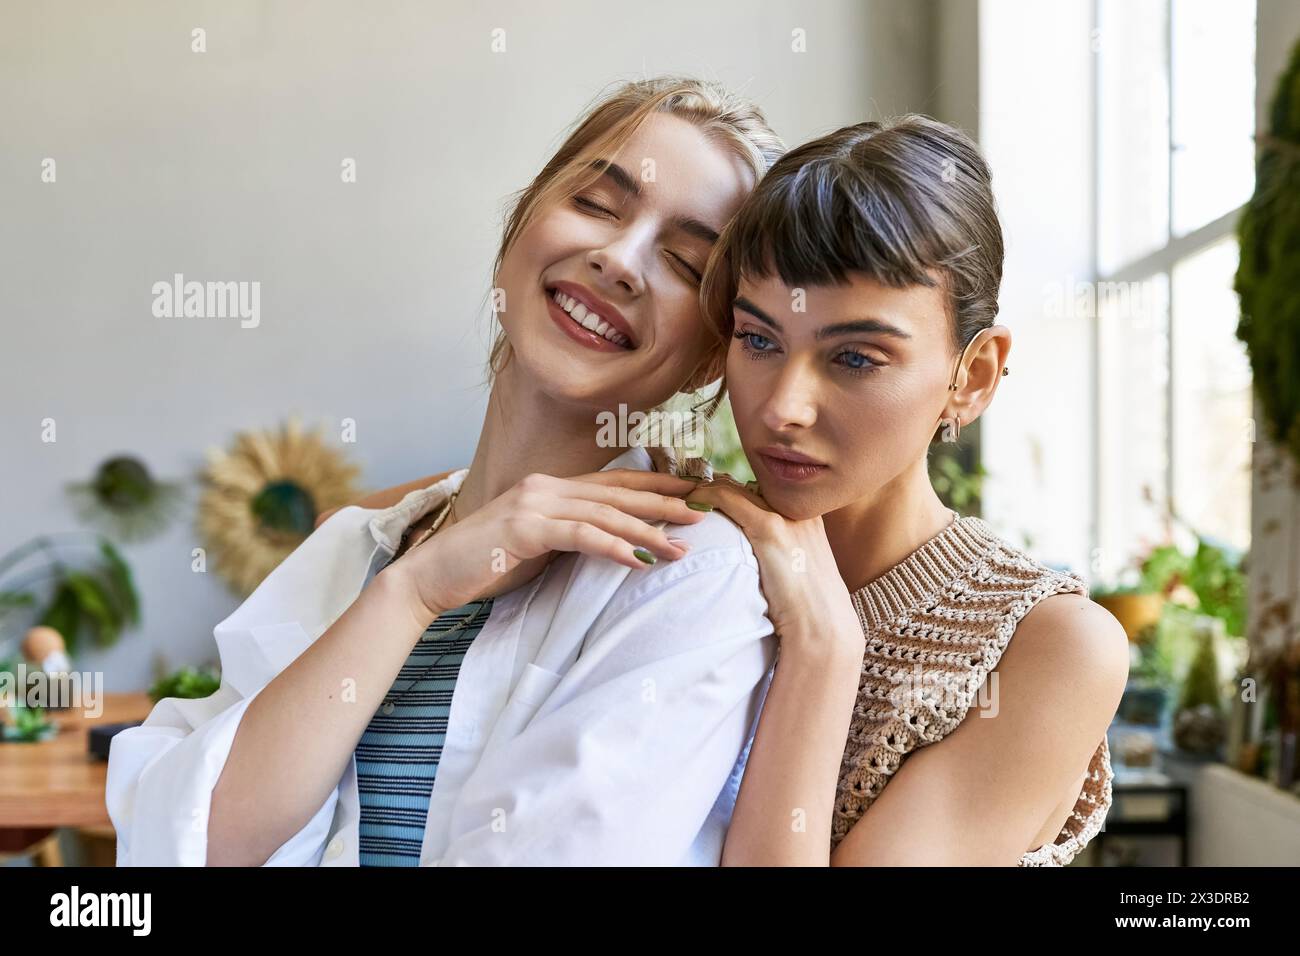 Two women, a tender loving lesbian couple, standing together in an art studio. Stock Photo